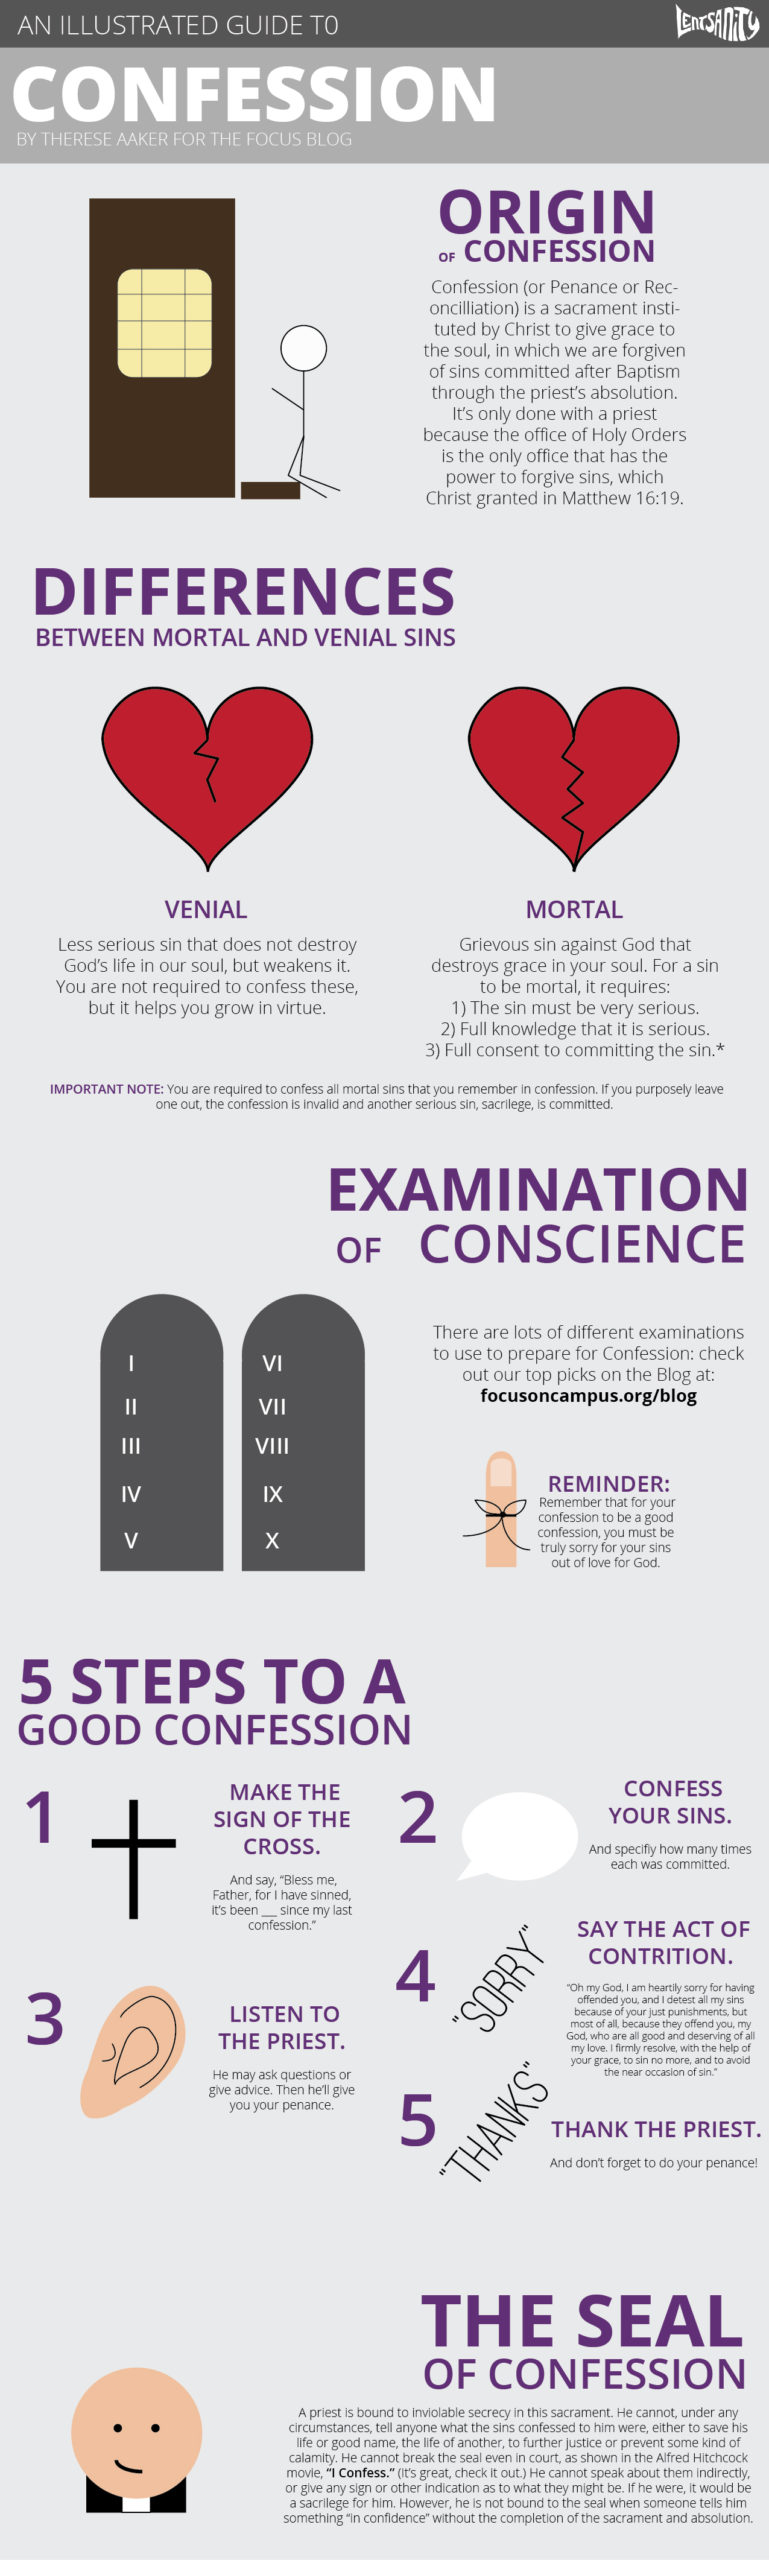 Illustrated Guide to Confession